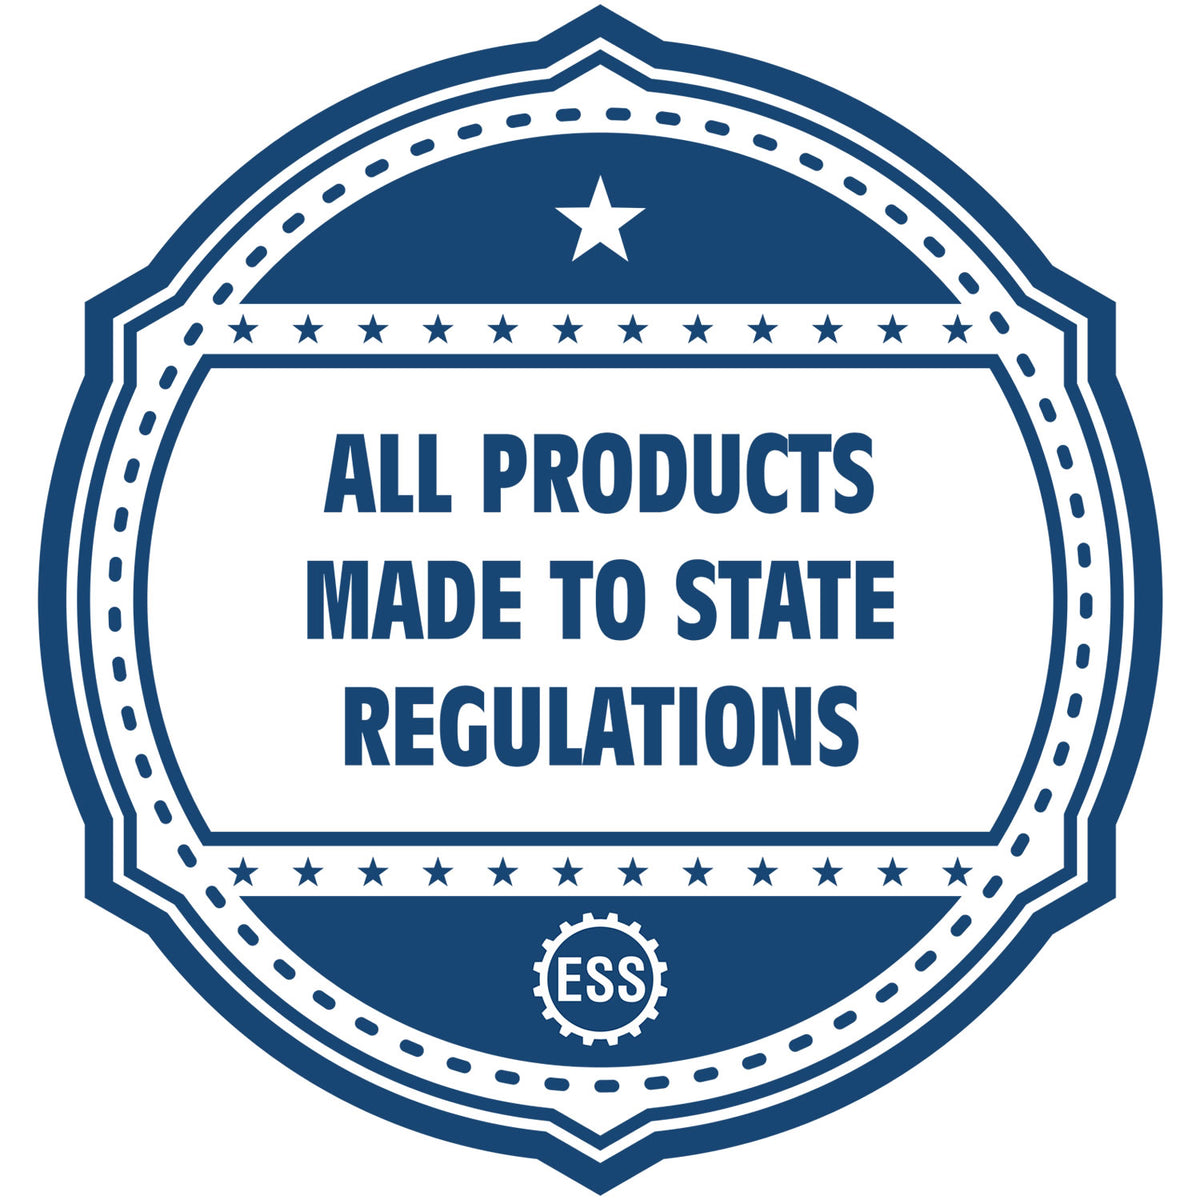 An icon or badge element for the Soft Pocket Missouri Landscape Architect Embosser showing that this product is made in compliance with state regulations.